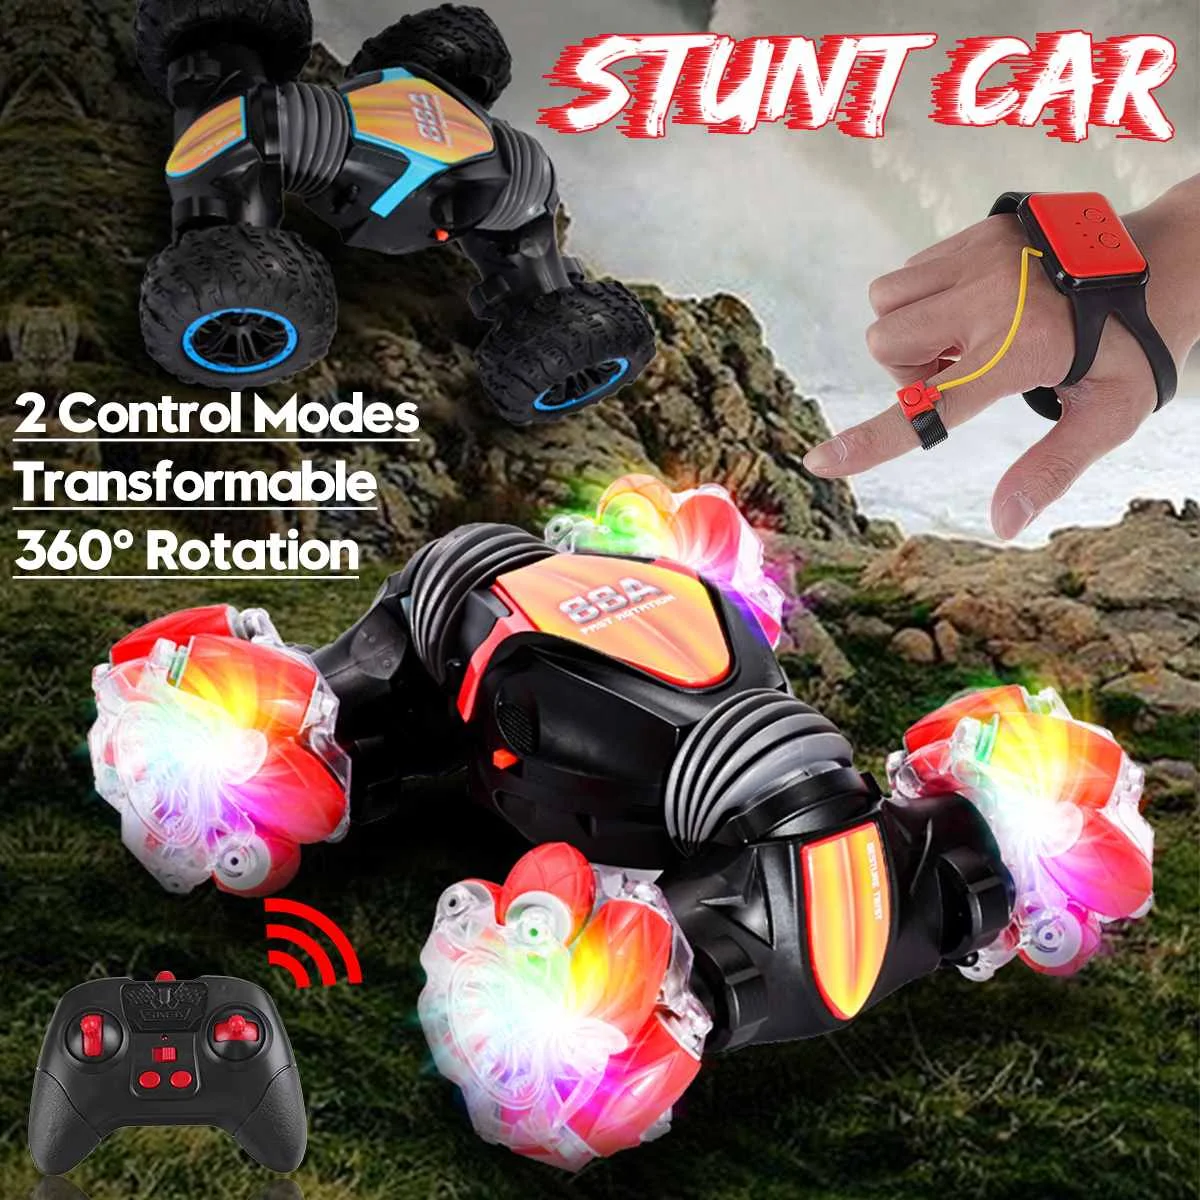 

2.4G 4WD Gesture Sensing Car Remote Control Stunt Car 360° All-Round Drift Twisting Off-Road Dancing Vehicle Kids Toys W/ Lights